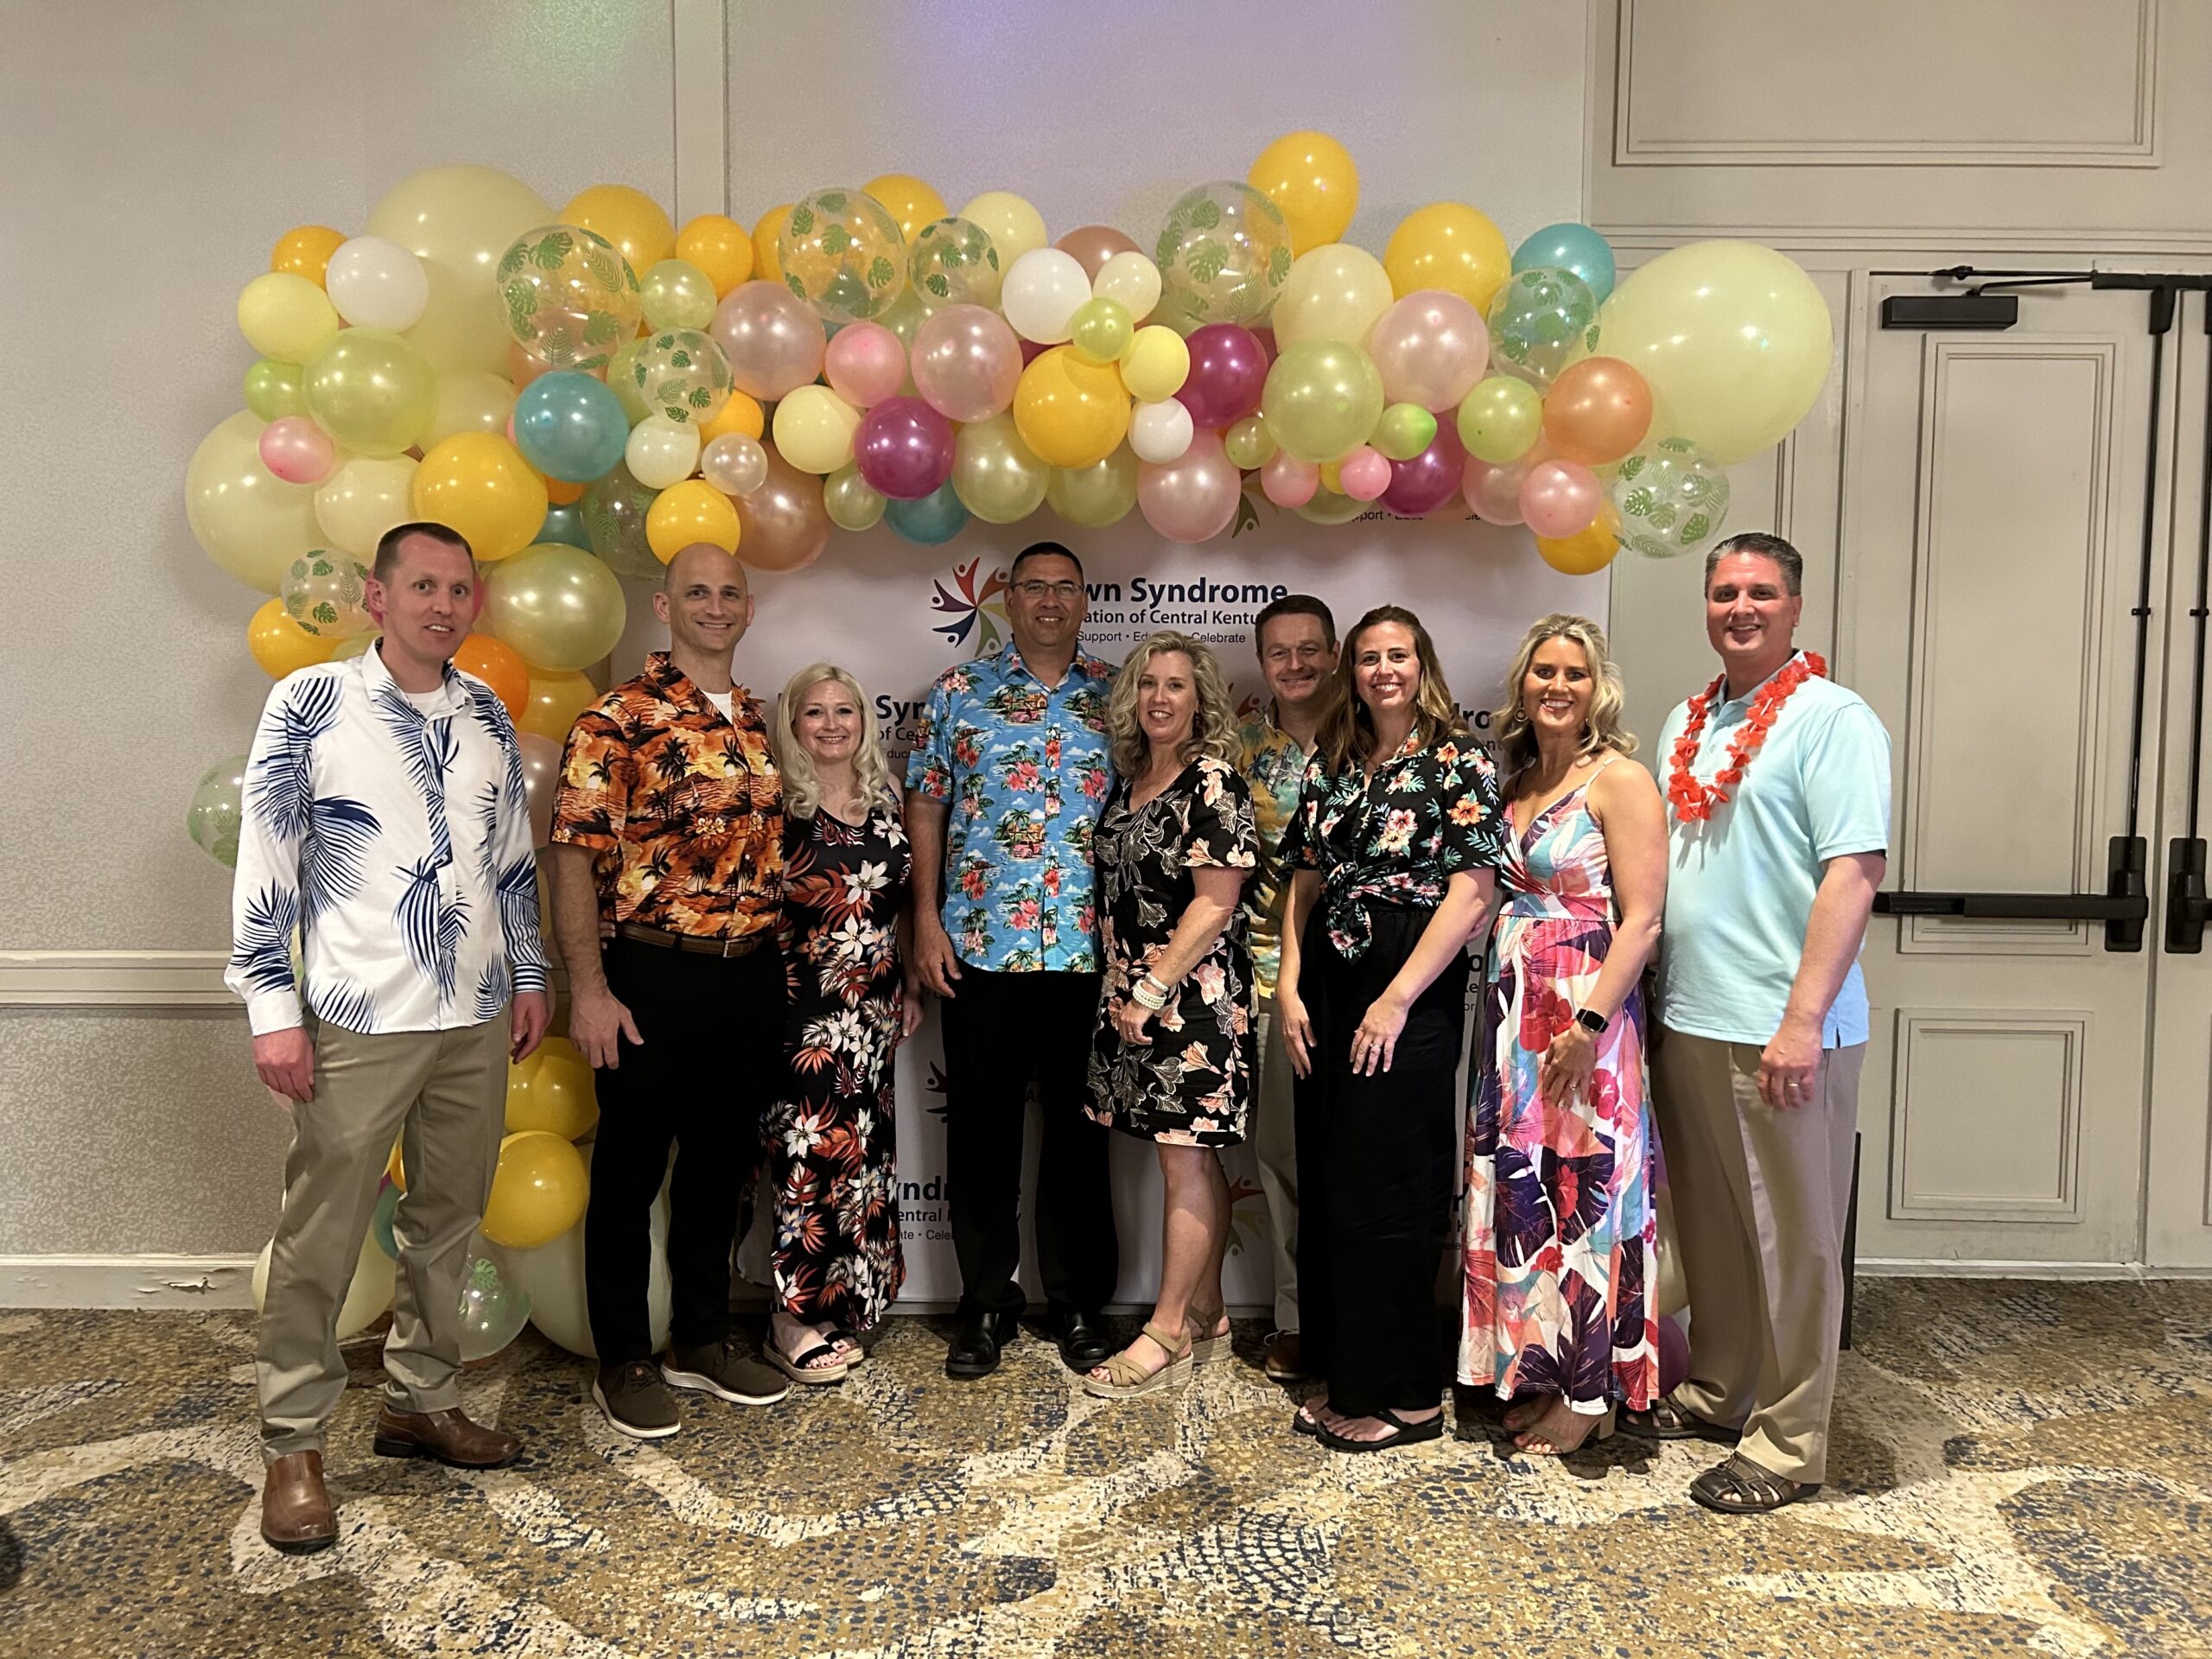 Messer Construction Company employees wearing tropical outfits posing for the camera at a Gala